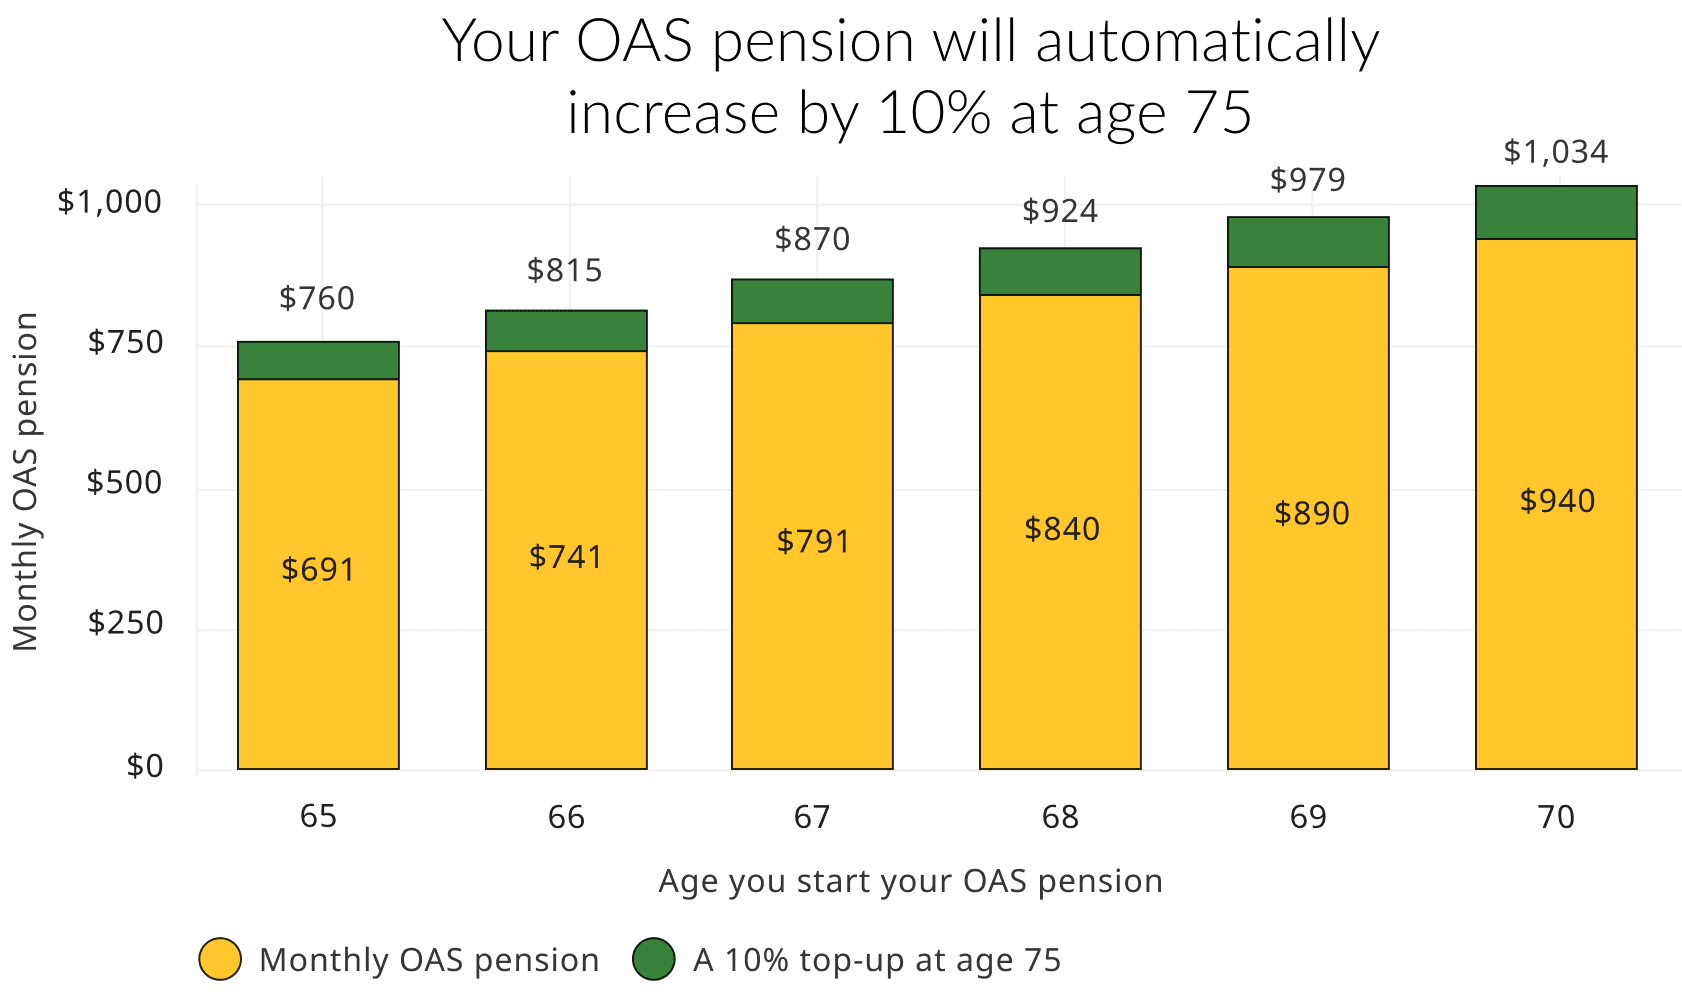 The chart shows monthly amounts for OAS pension at age 75, based on what age you start. It shows that the longer you wait to start your pension, the more money you'll collect. You can begin your OAS pension at age 65 for the smallest amount or at age 70 for the largest amount. If you choose to delay and collect a higher pension, the 10% automatic increase at age 75 will give you more money.